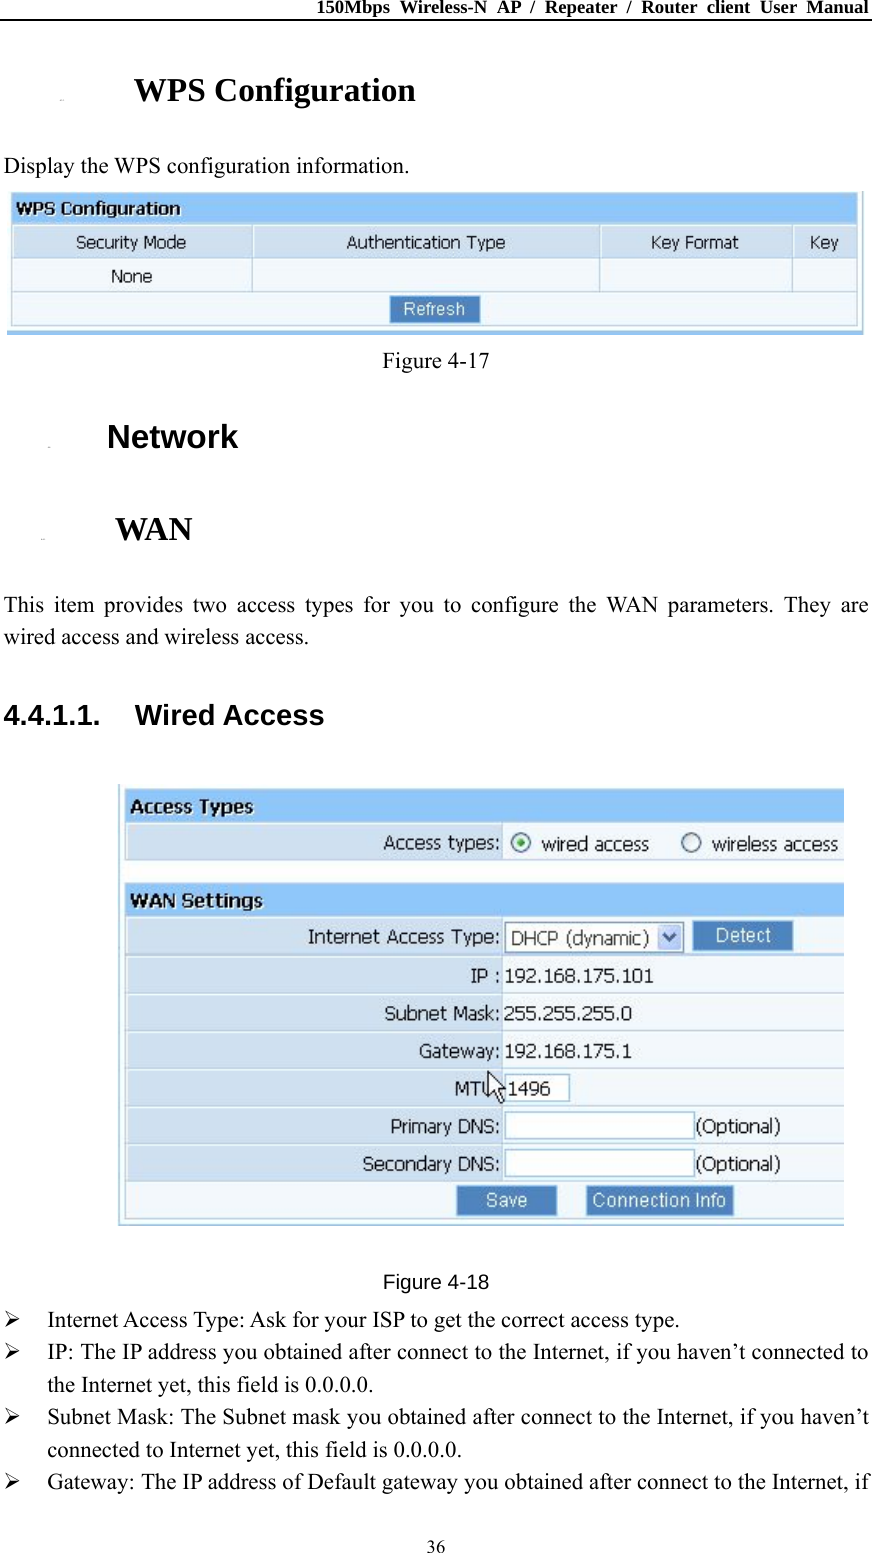 150Mbps Wireless-N AP / Repeater / Router client User Manual  364.3.3. WPS Configuration Display the WPS configuration information.  Figure 4-17 4.4. Network 4.4.1. WAN This item provides two access types for you to configure the WAN parameters. They are wired access and wireless access. 4.4.1.1. Wired Access  Figure 4-18  Internet Access Type: Ask for your ISP to get the correct access type.  IP: The IP address you obtained after connect to the Internet, if you haven’t connected to the Internet yet, this field is 0.0.0.0.  Subnet Mask: The Subnet mask you obtained after connect to the Internet, if you haven’t connected to Internet yet, this field is 0.0.0.0.  Gateway: The IP address of Default gateway you obtained after connect to the Internet, if 